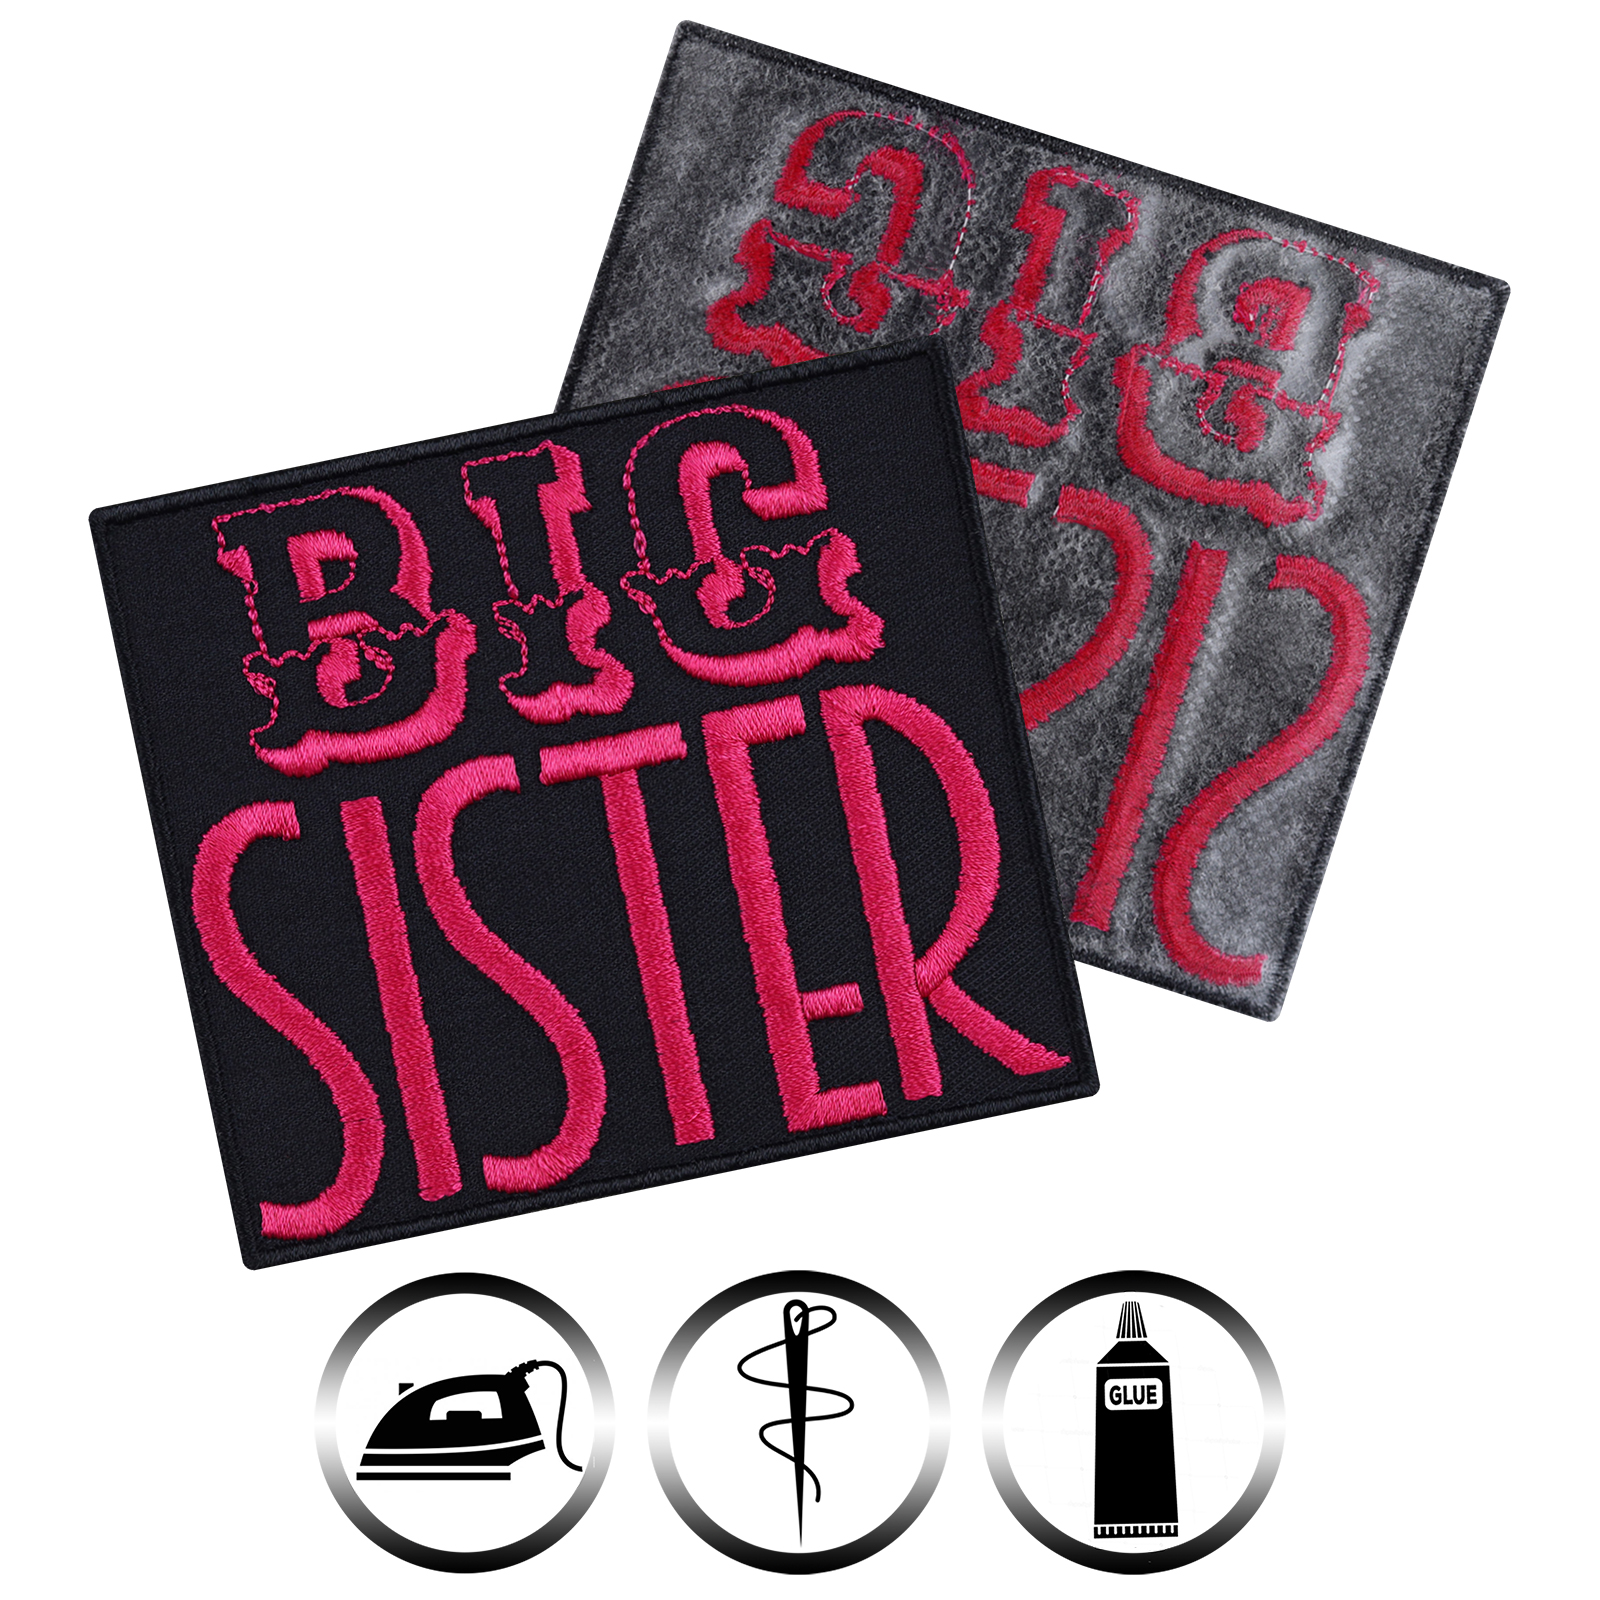 Big sister - Patch